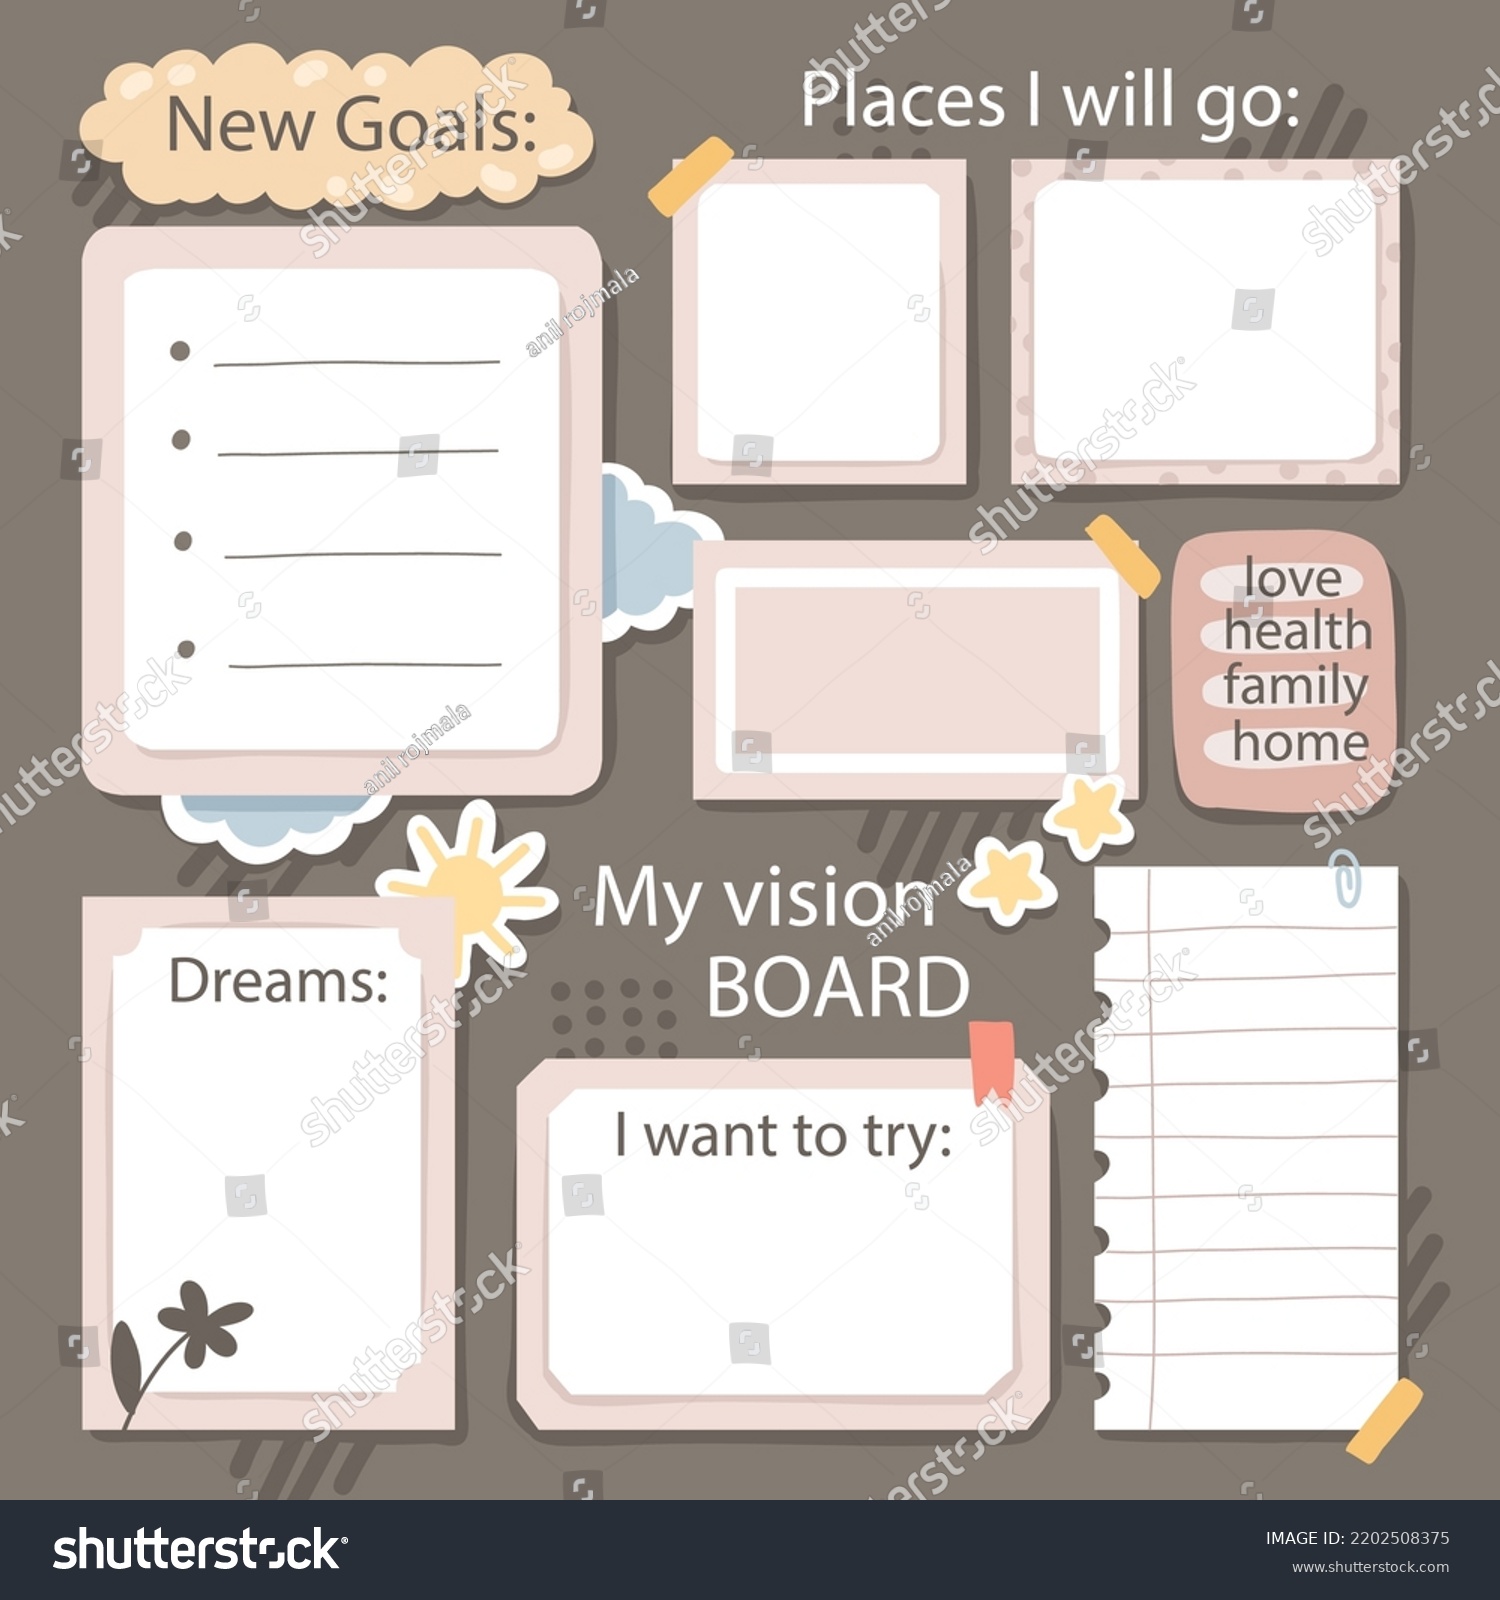 Vision Board Template Space Goals Dreams Stock Vector (Royalty Free ...